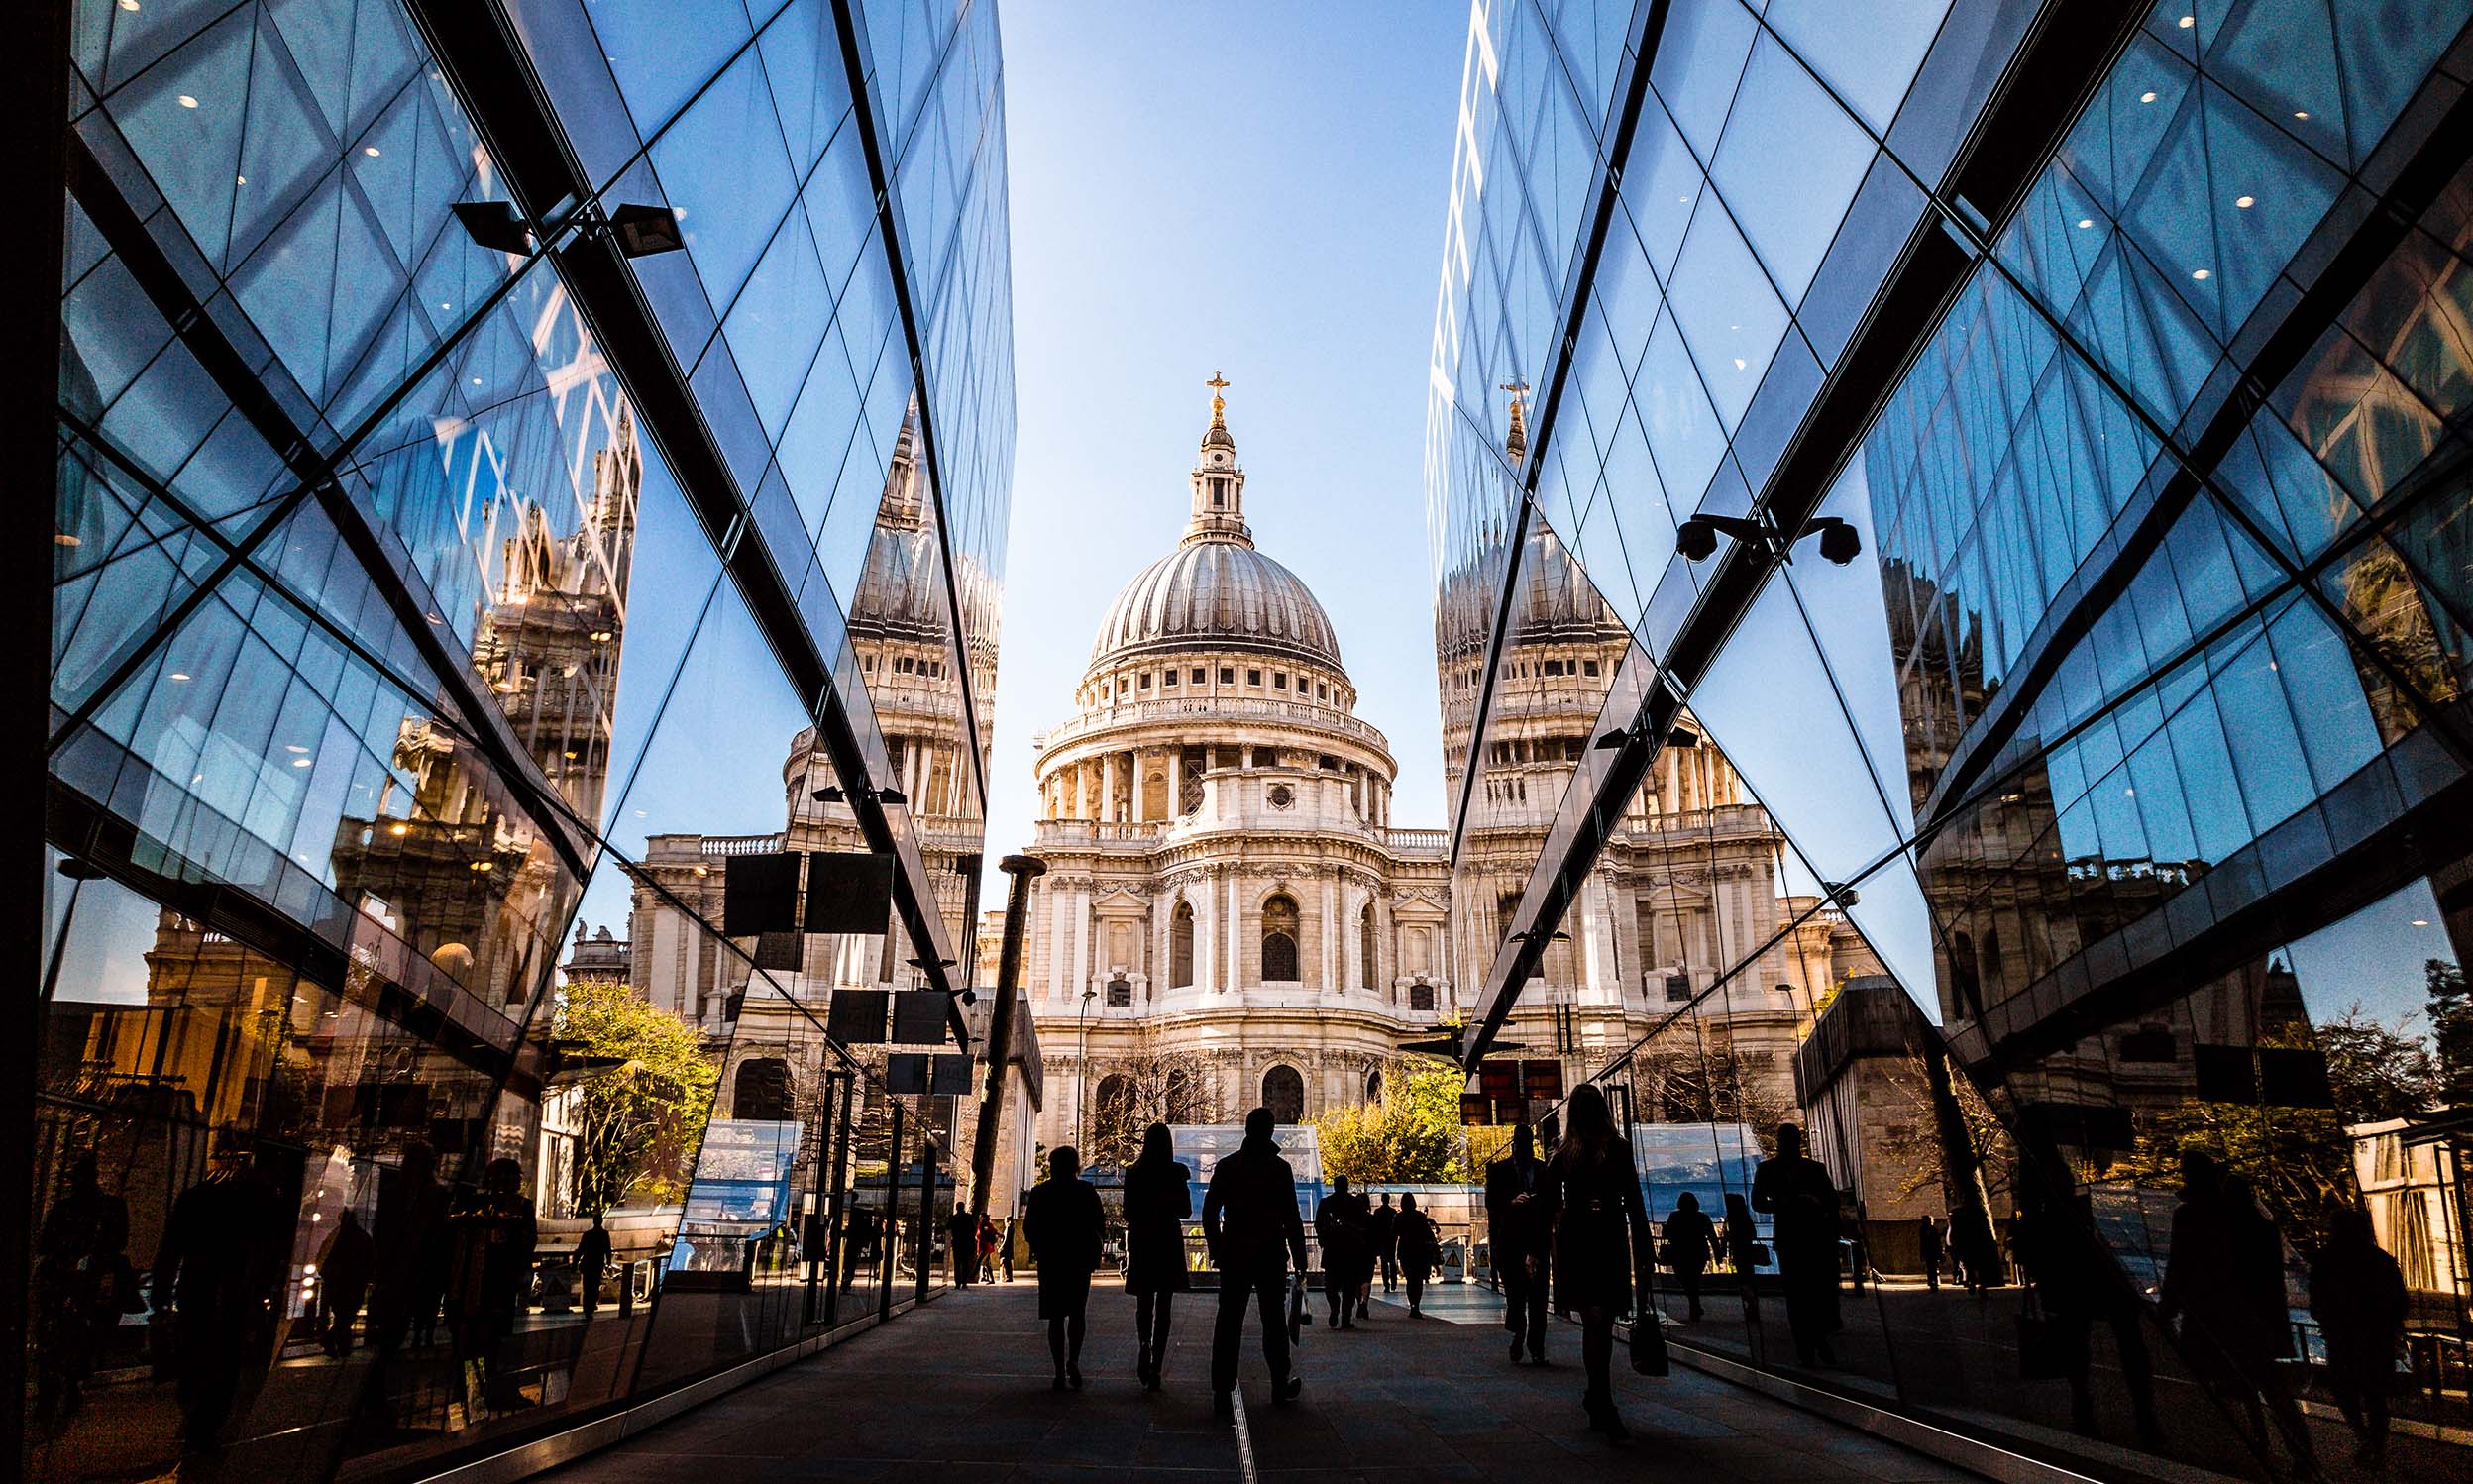 Color image depicting a crowd of people, thrown into silhouette and therefore unrecognizable, walking alongside modern futuristic architecture of glass and steel. In the distance we can see the ancient and iconic dome of St Paul's cathedral.